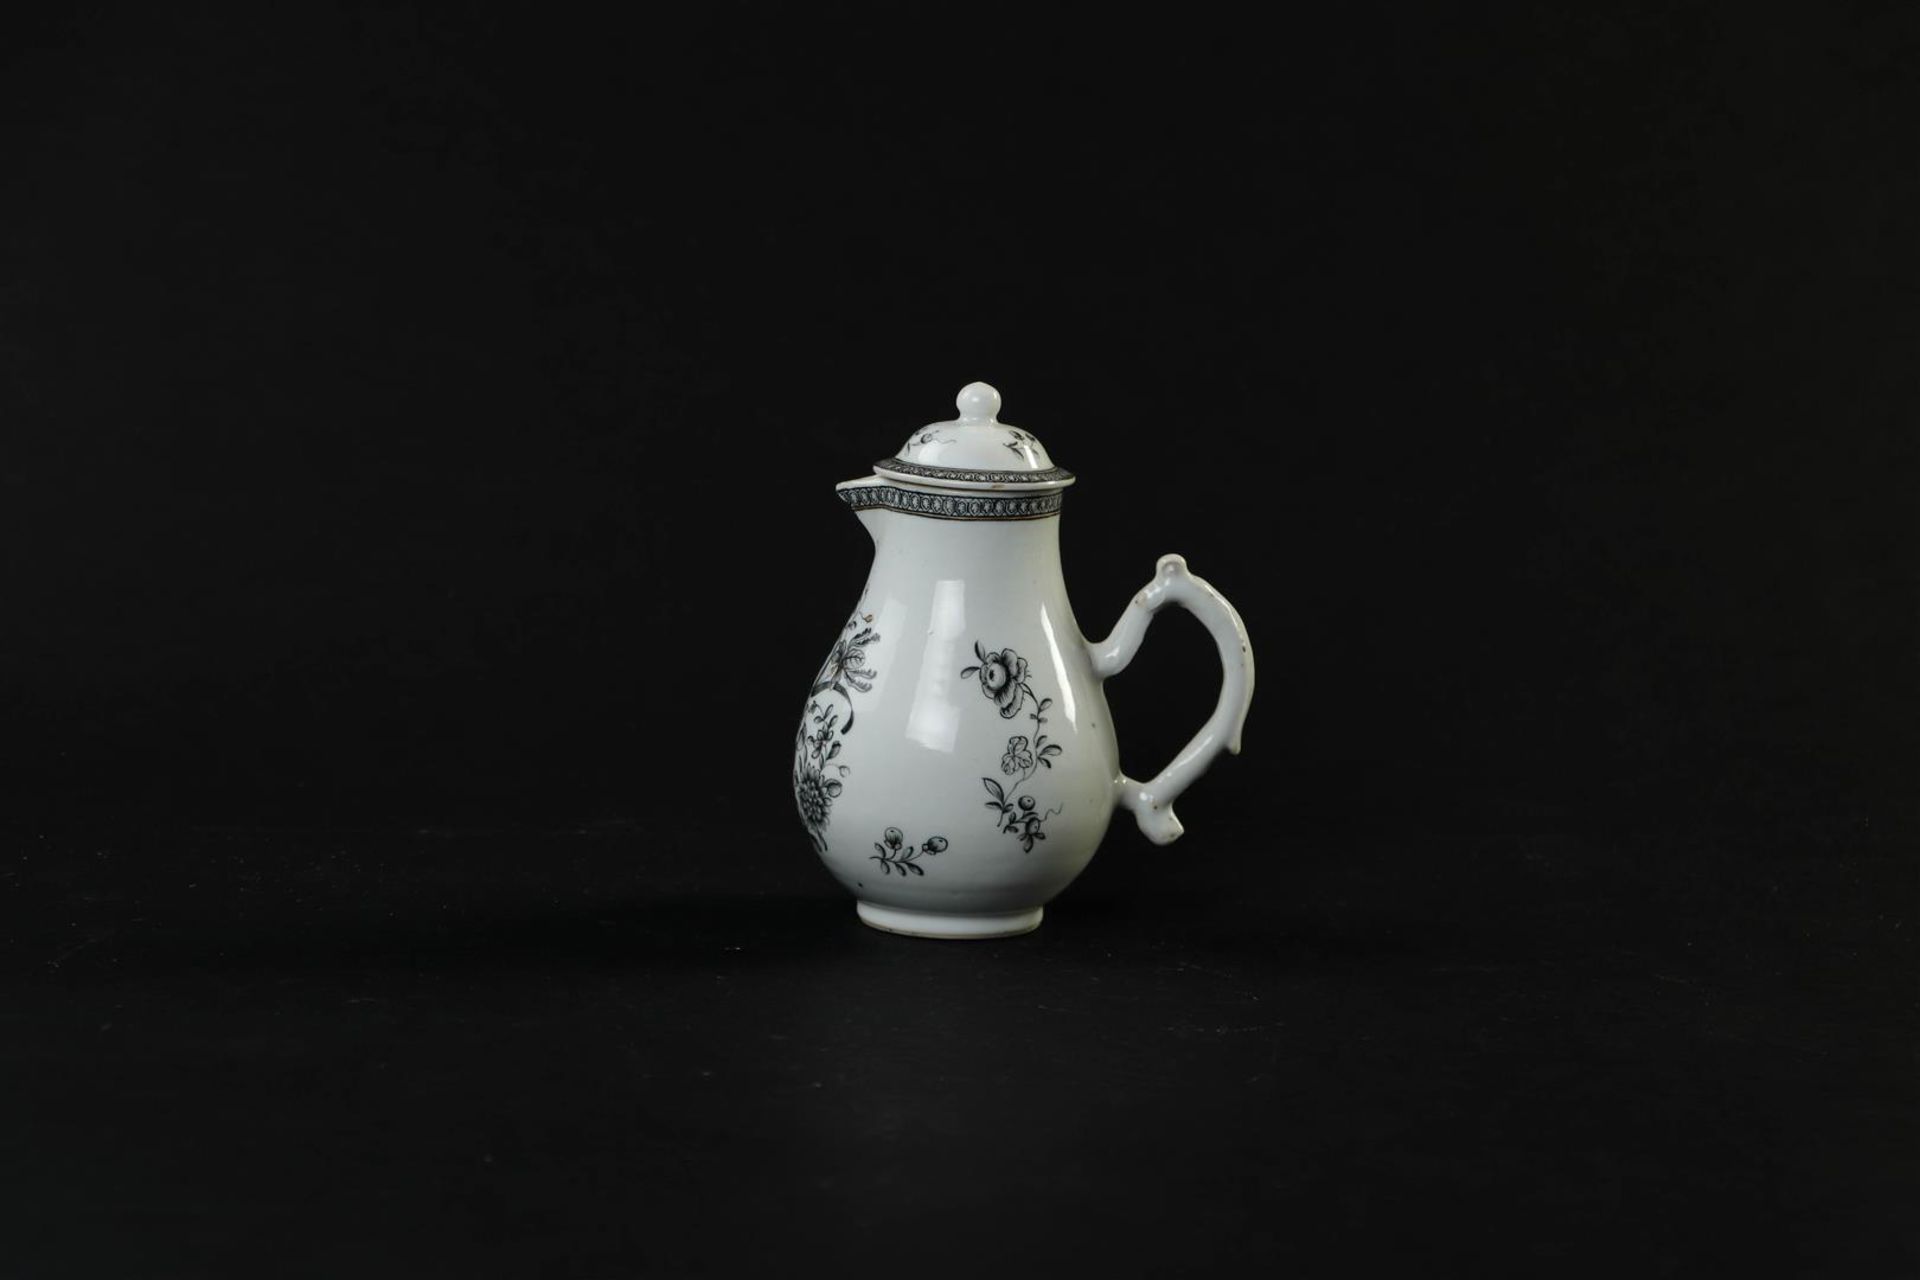 An Encre de Chine tableware set consisting of a teapot, milk jug, tea caddy, patty pan and spoon tra - Image 9 of 24